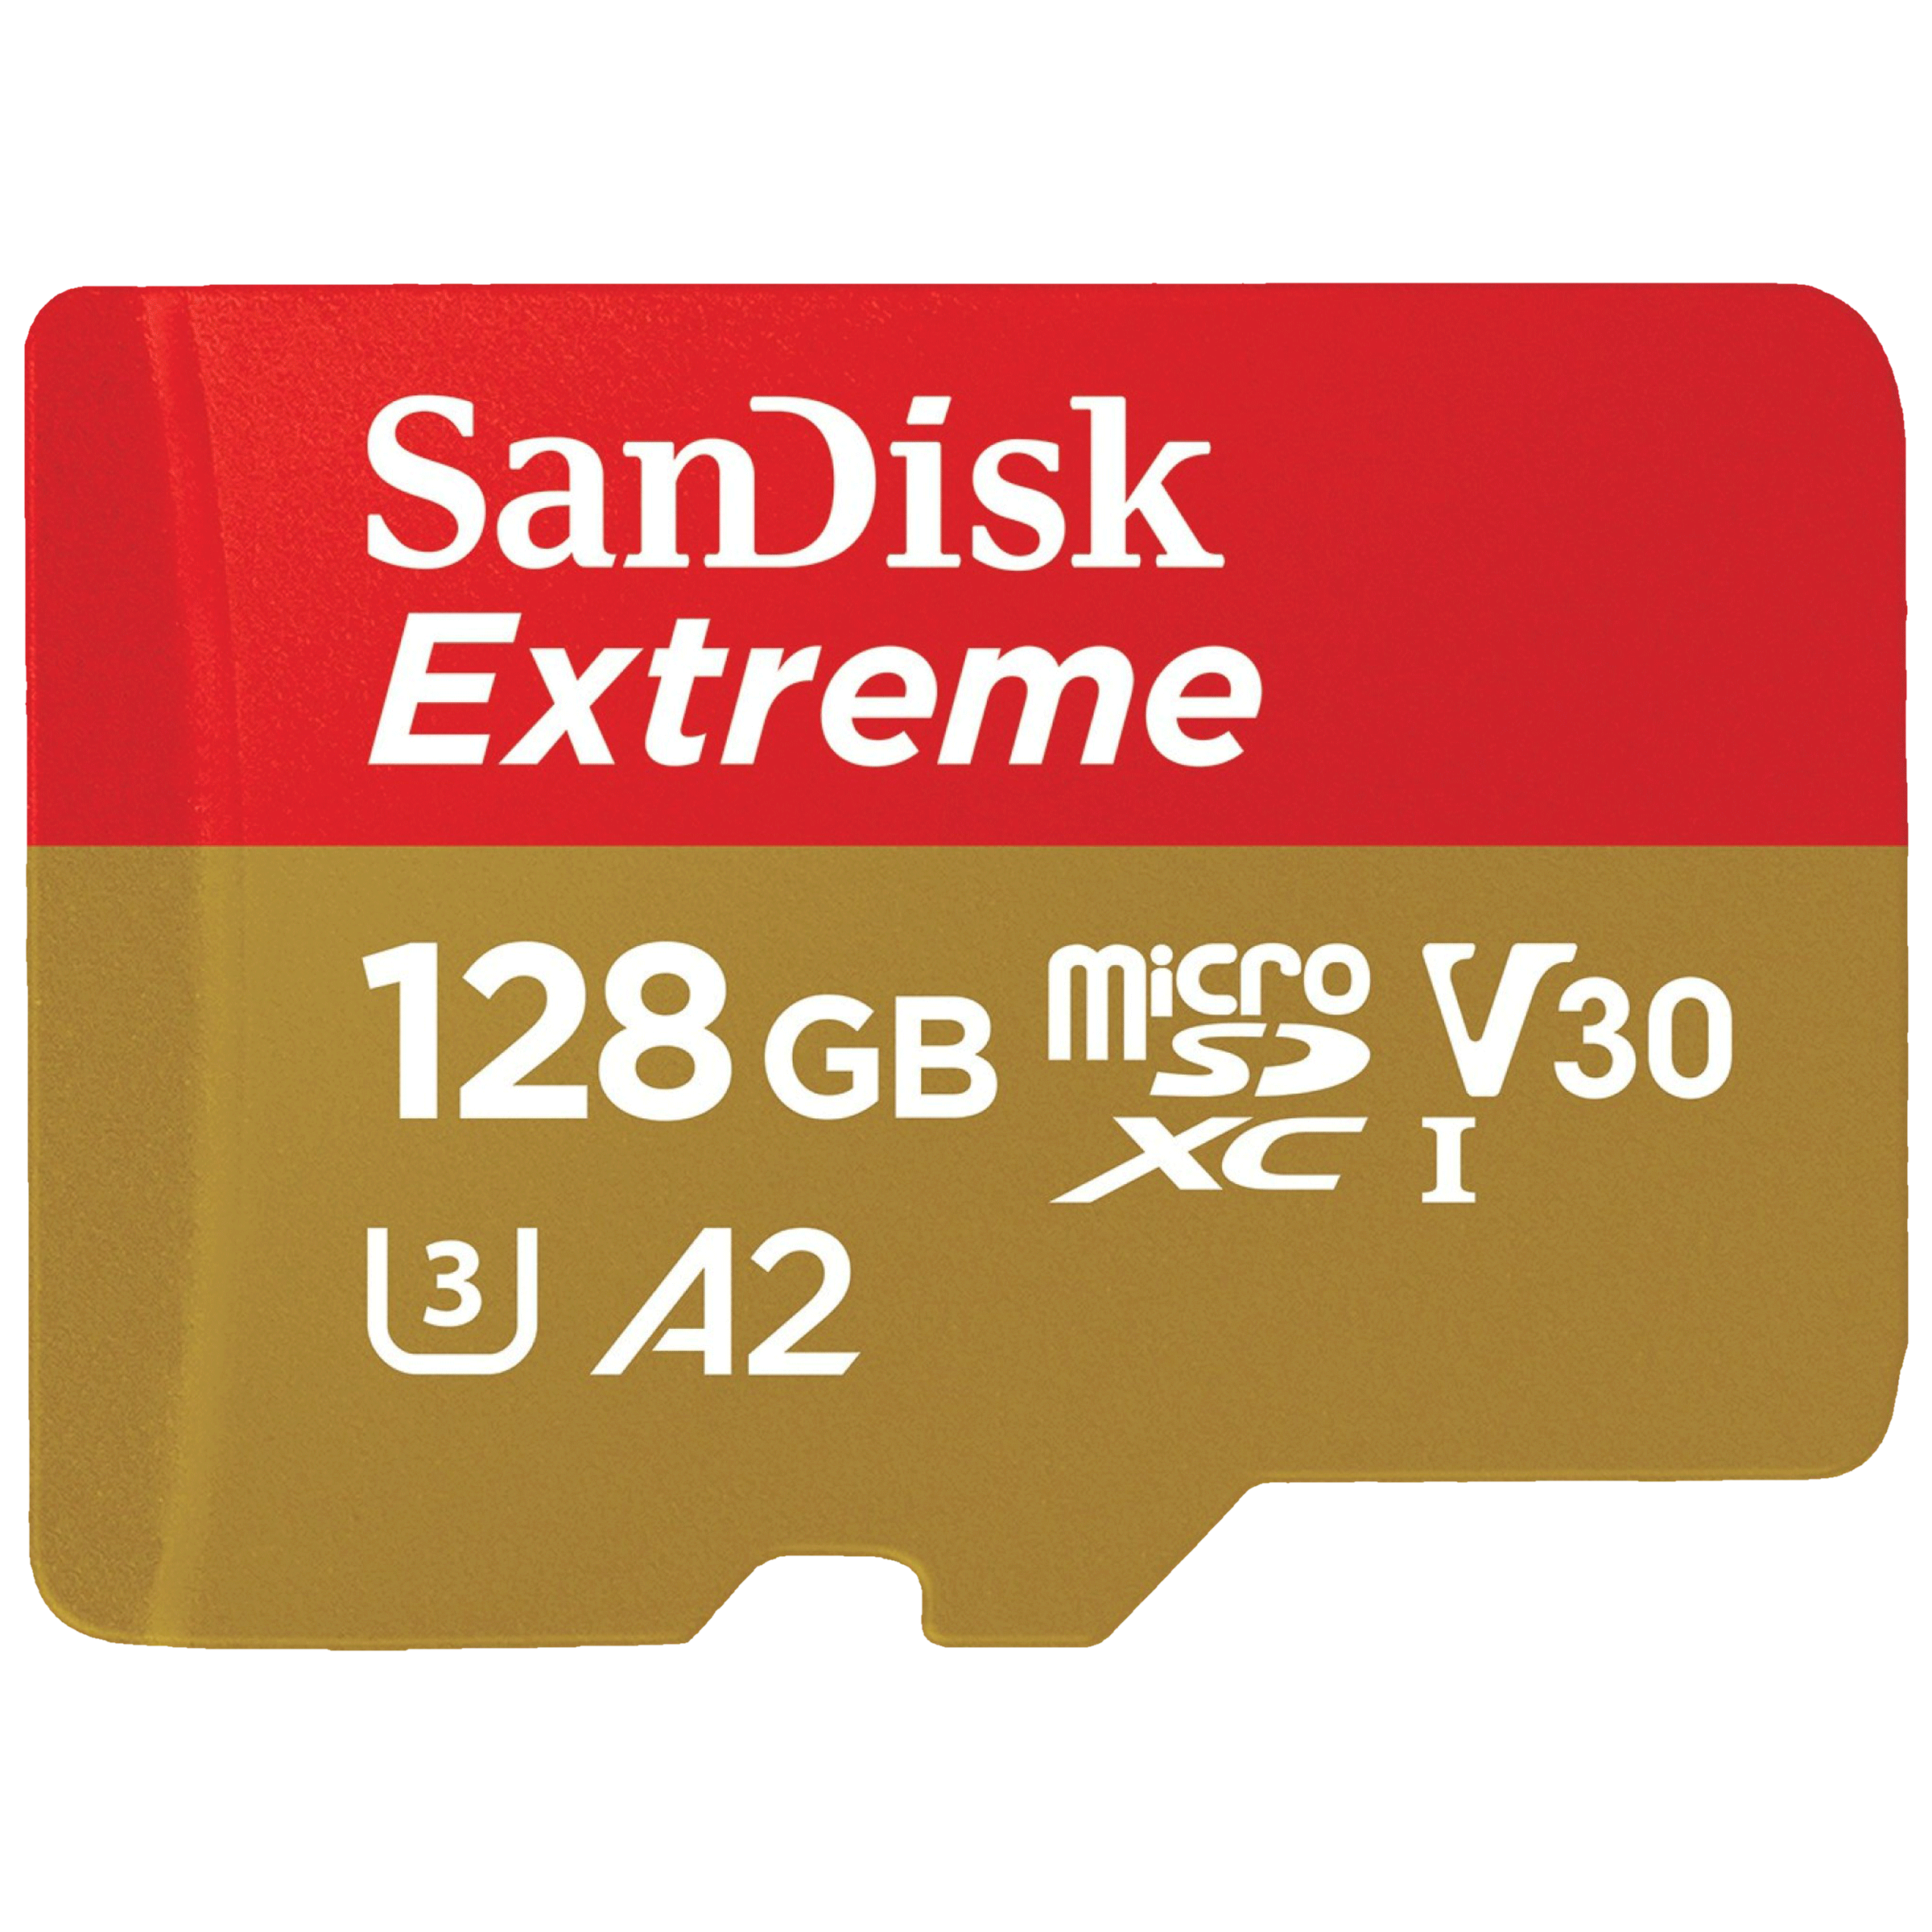 Buy SanDisk 128GB SDXC Extreme Pro Memory Card in India